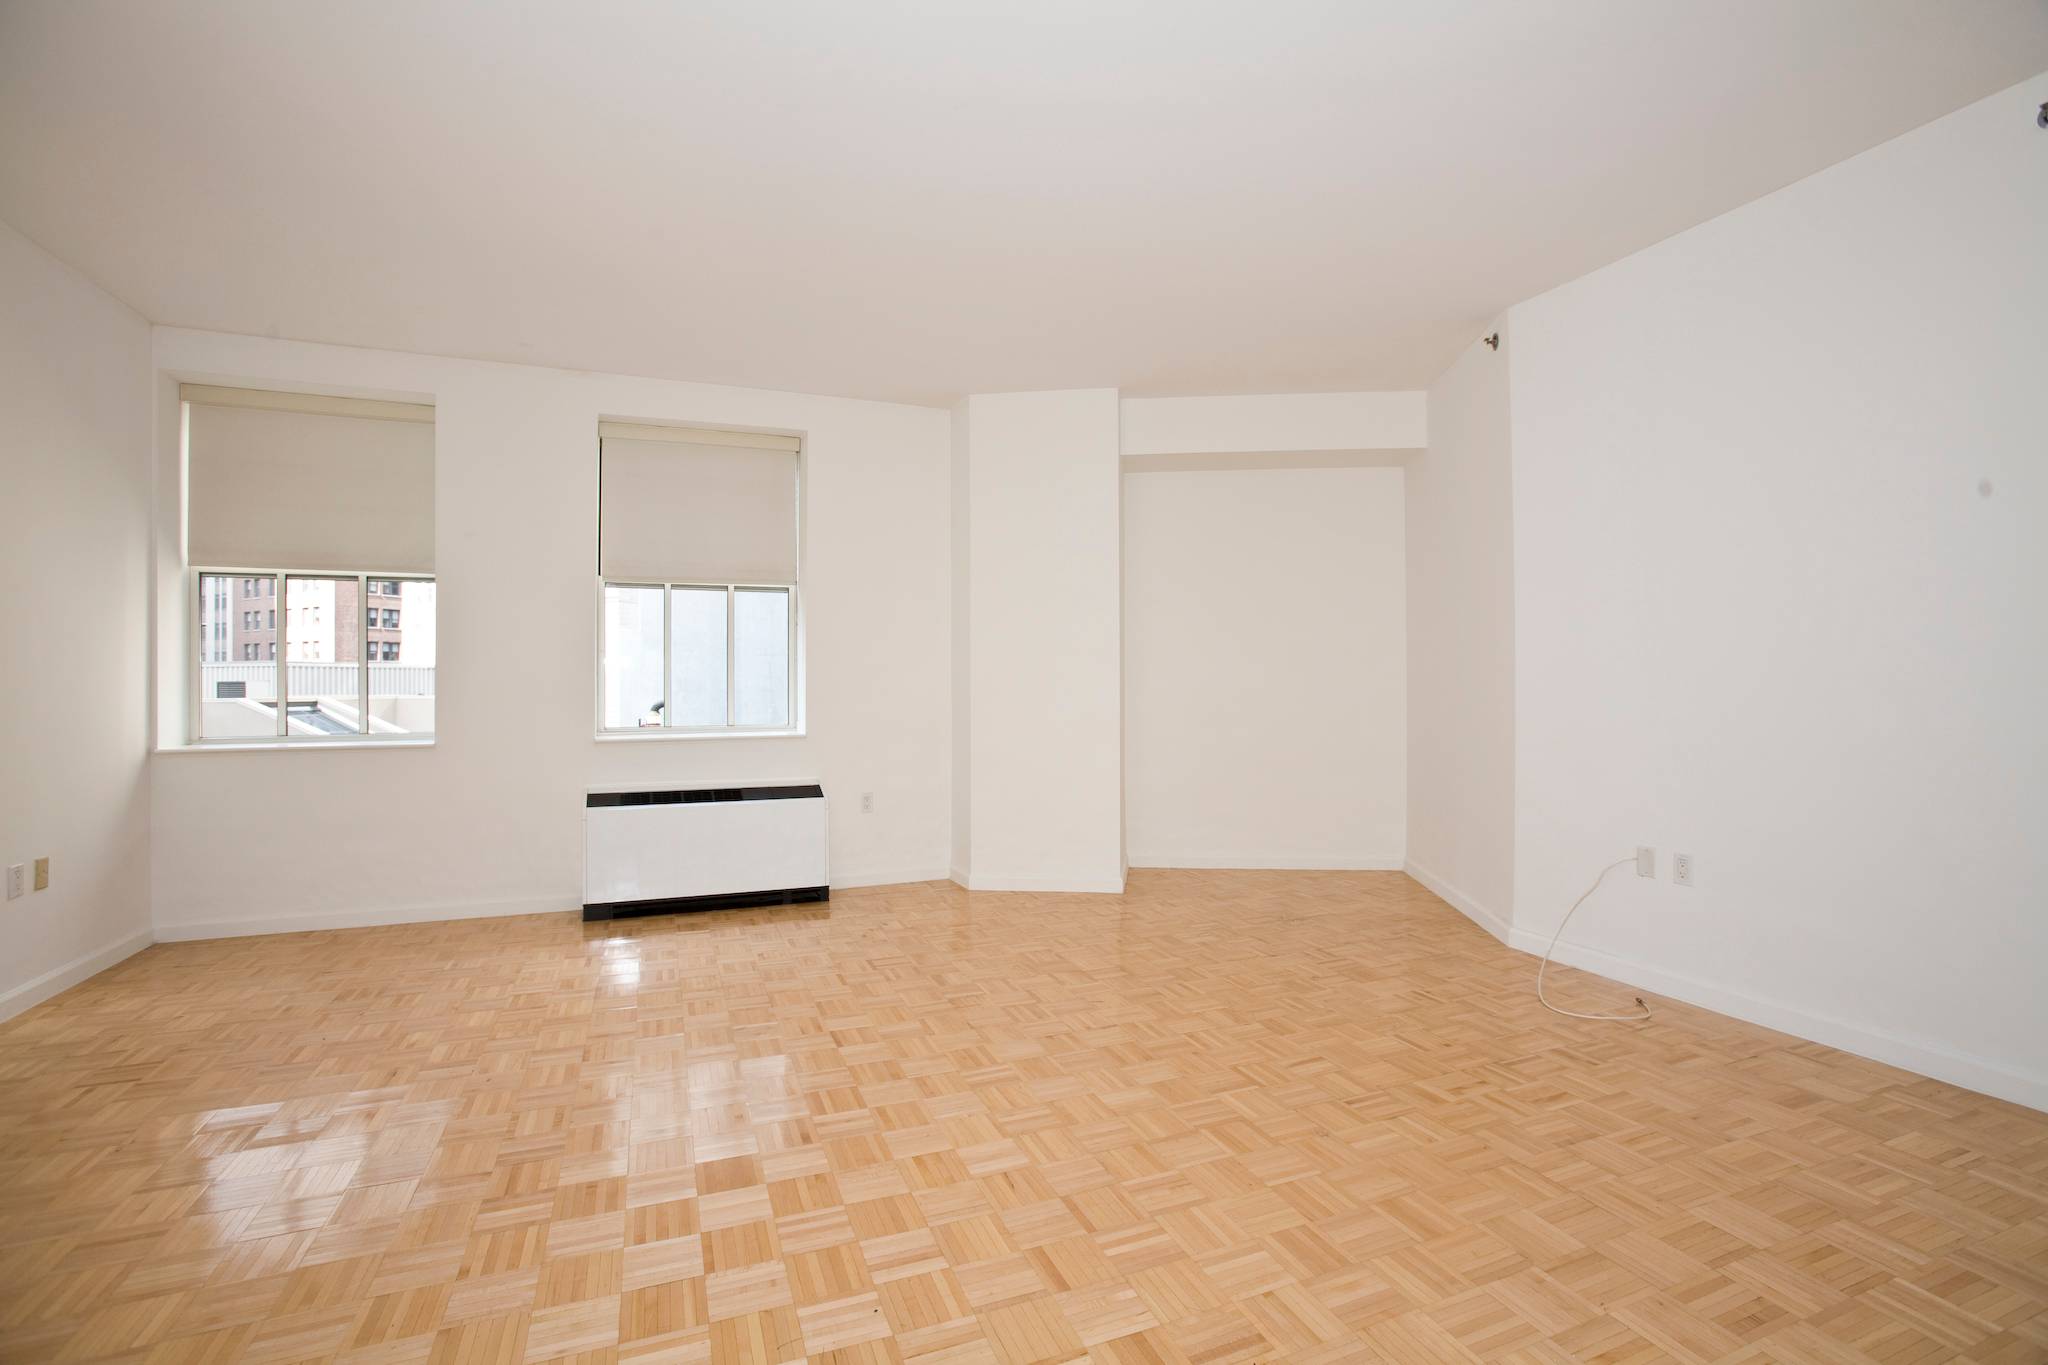 Financial District 2Bed/Flex 3 Bedroom Apartment Npw Available!